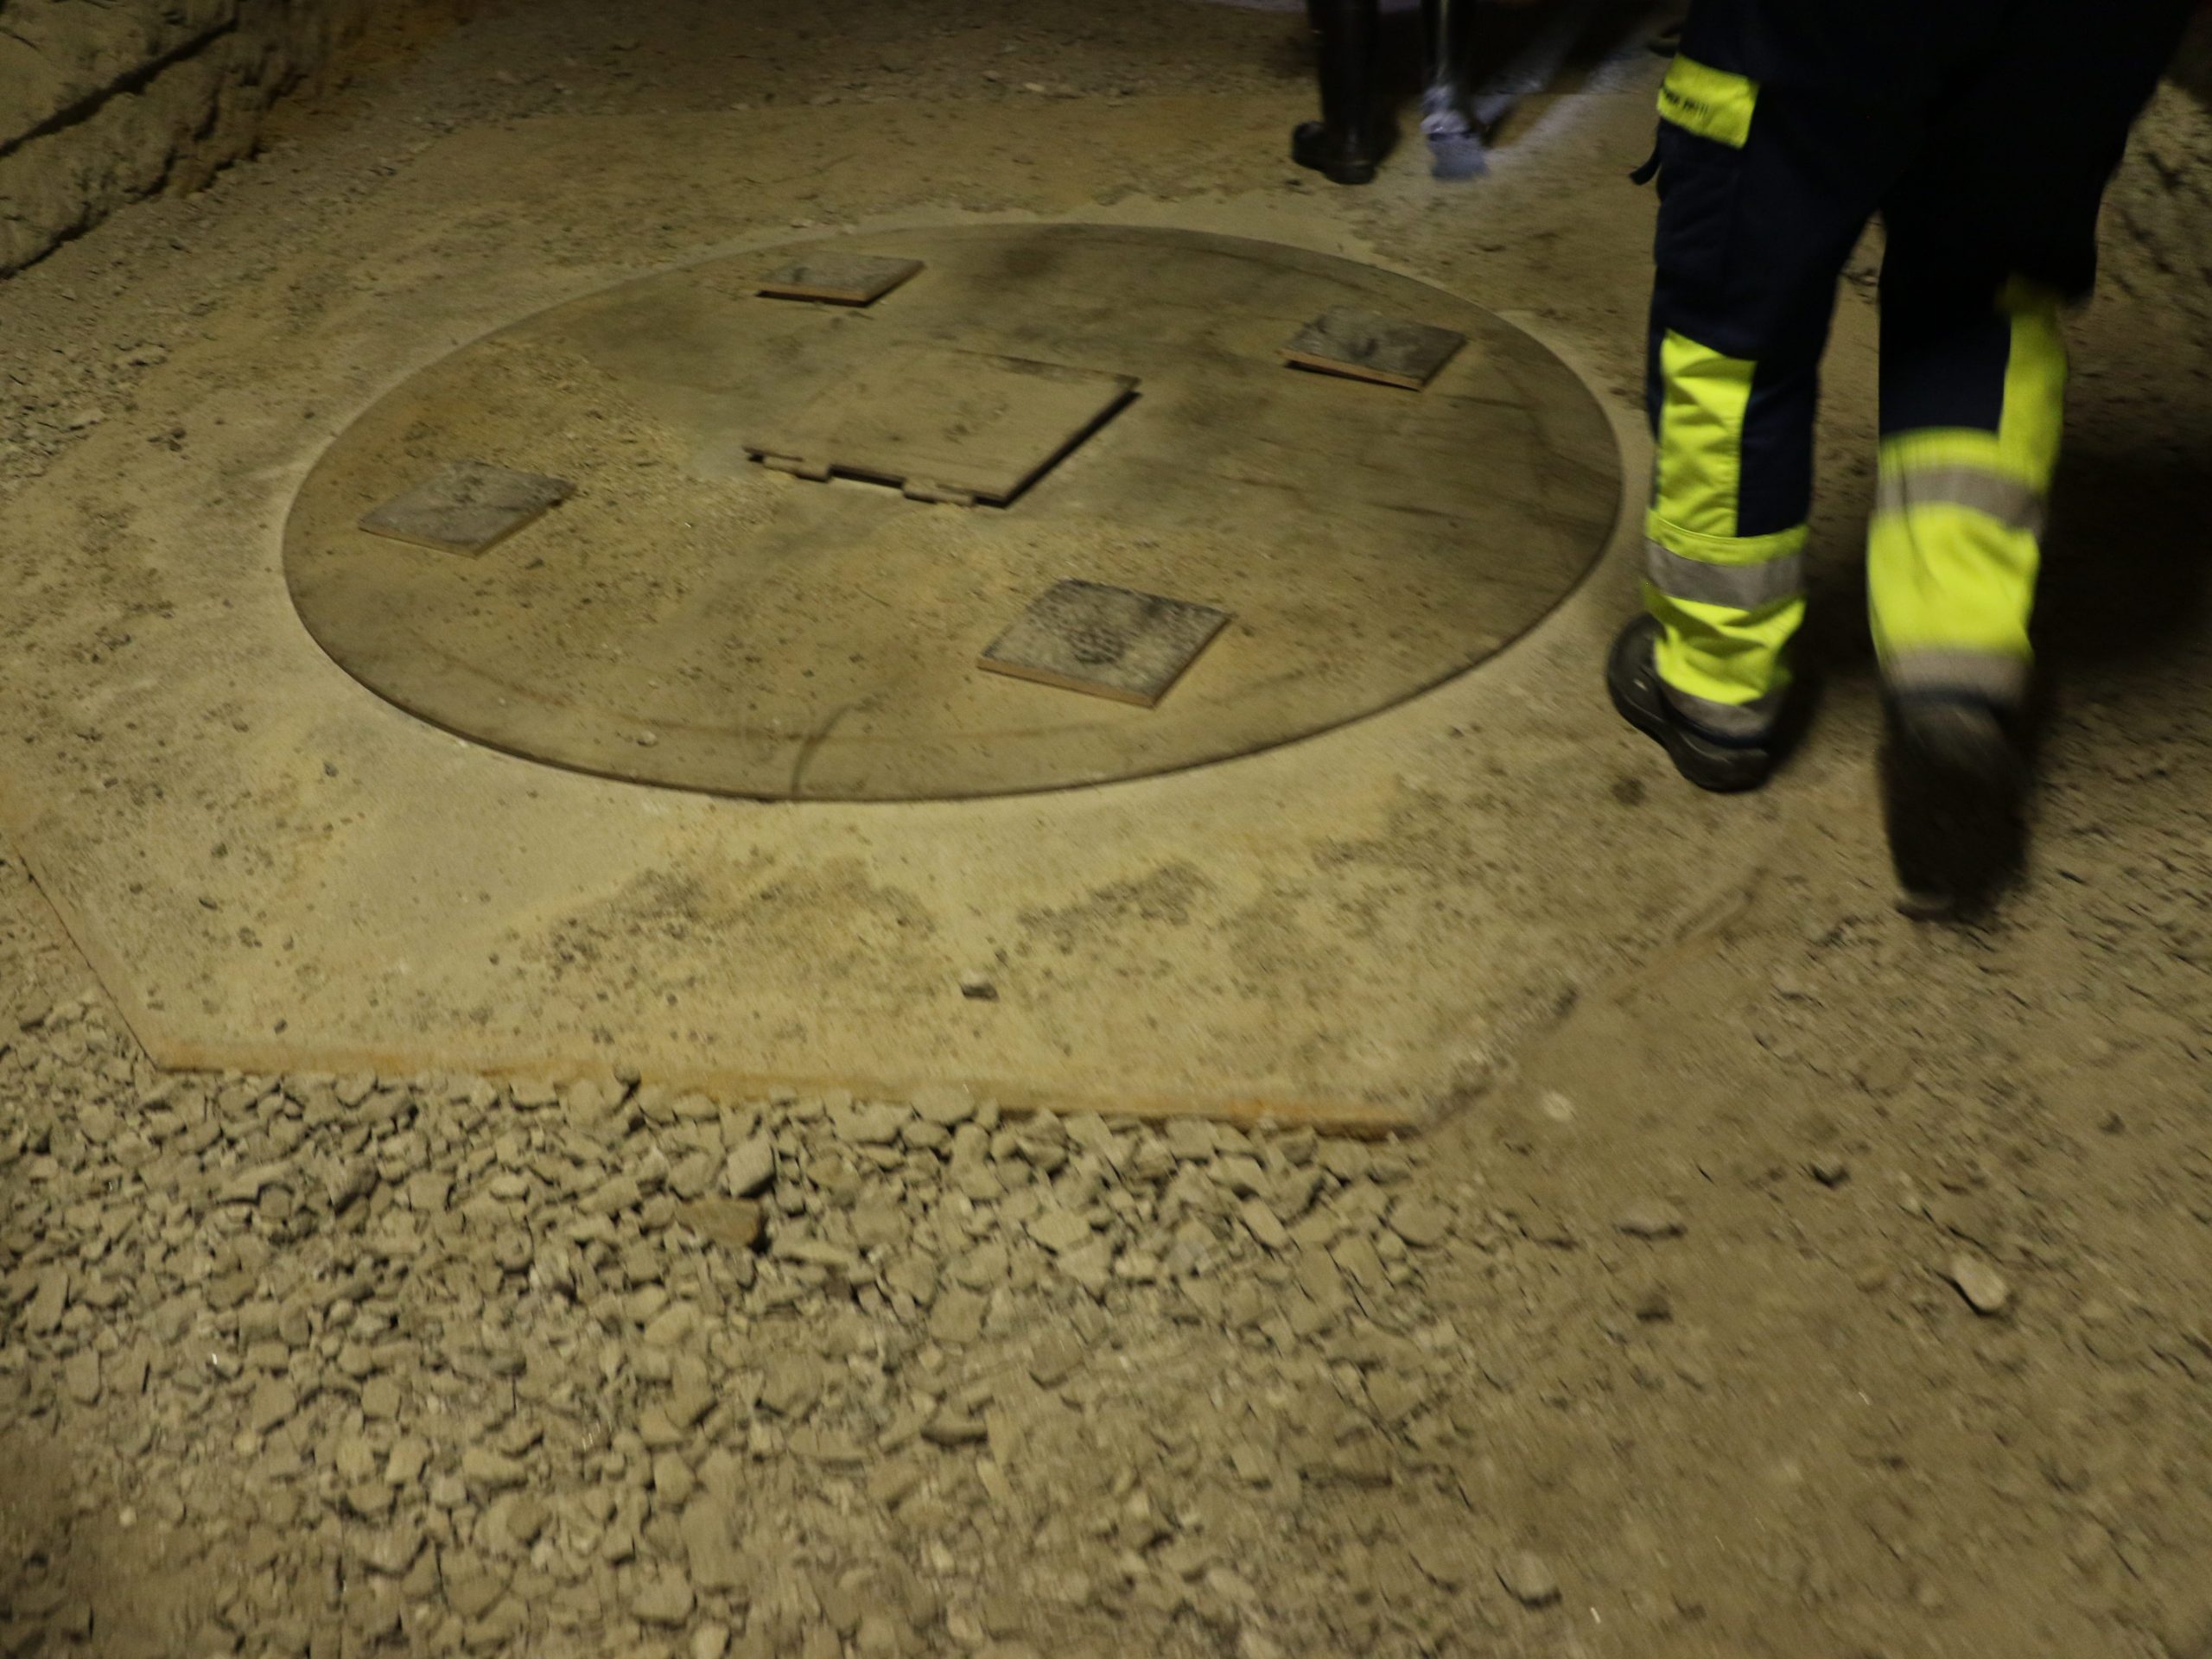 A picture shows the size of the hole in which the spent nuclear fuel is deposited.